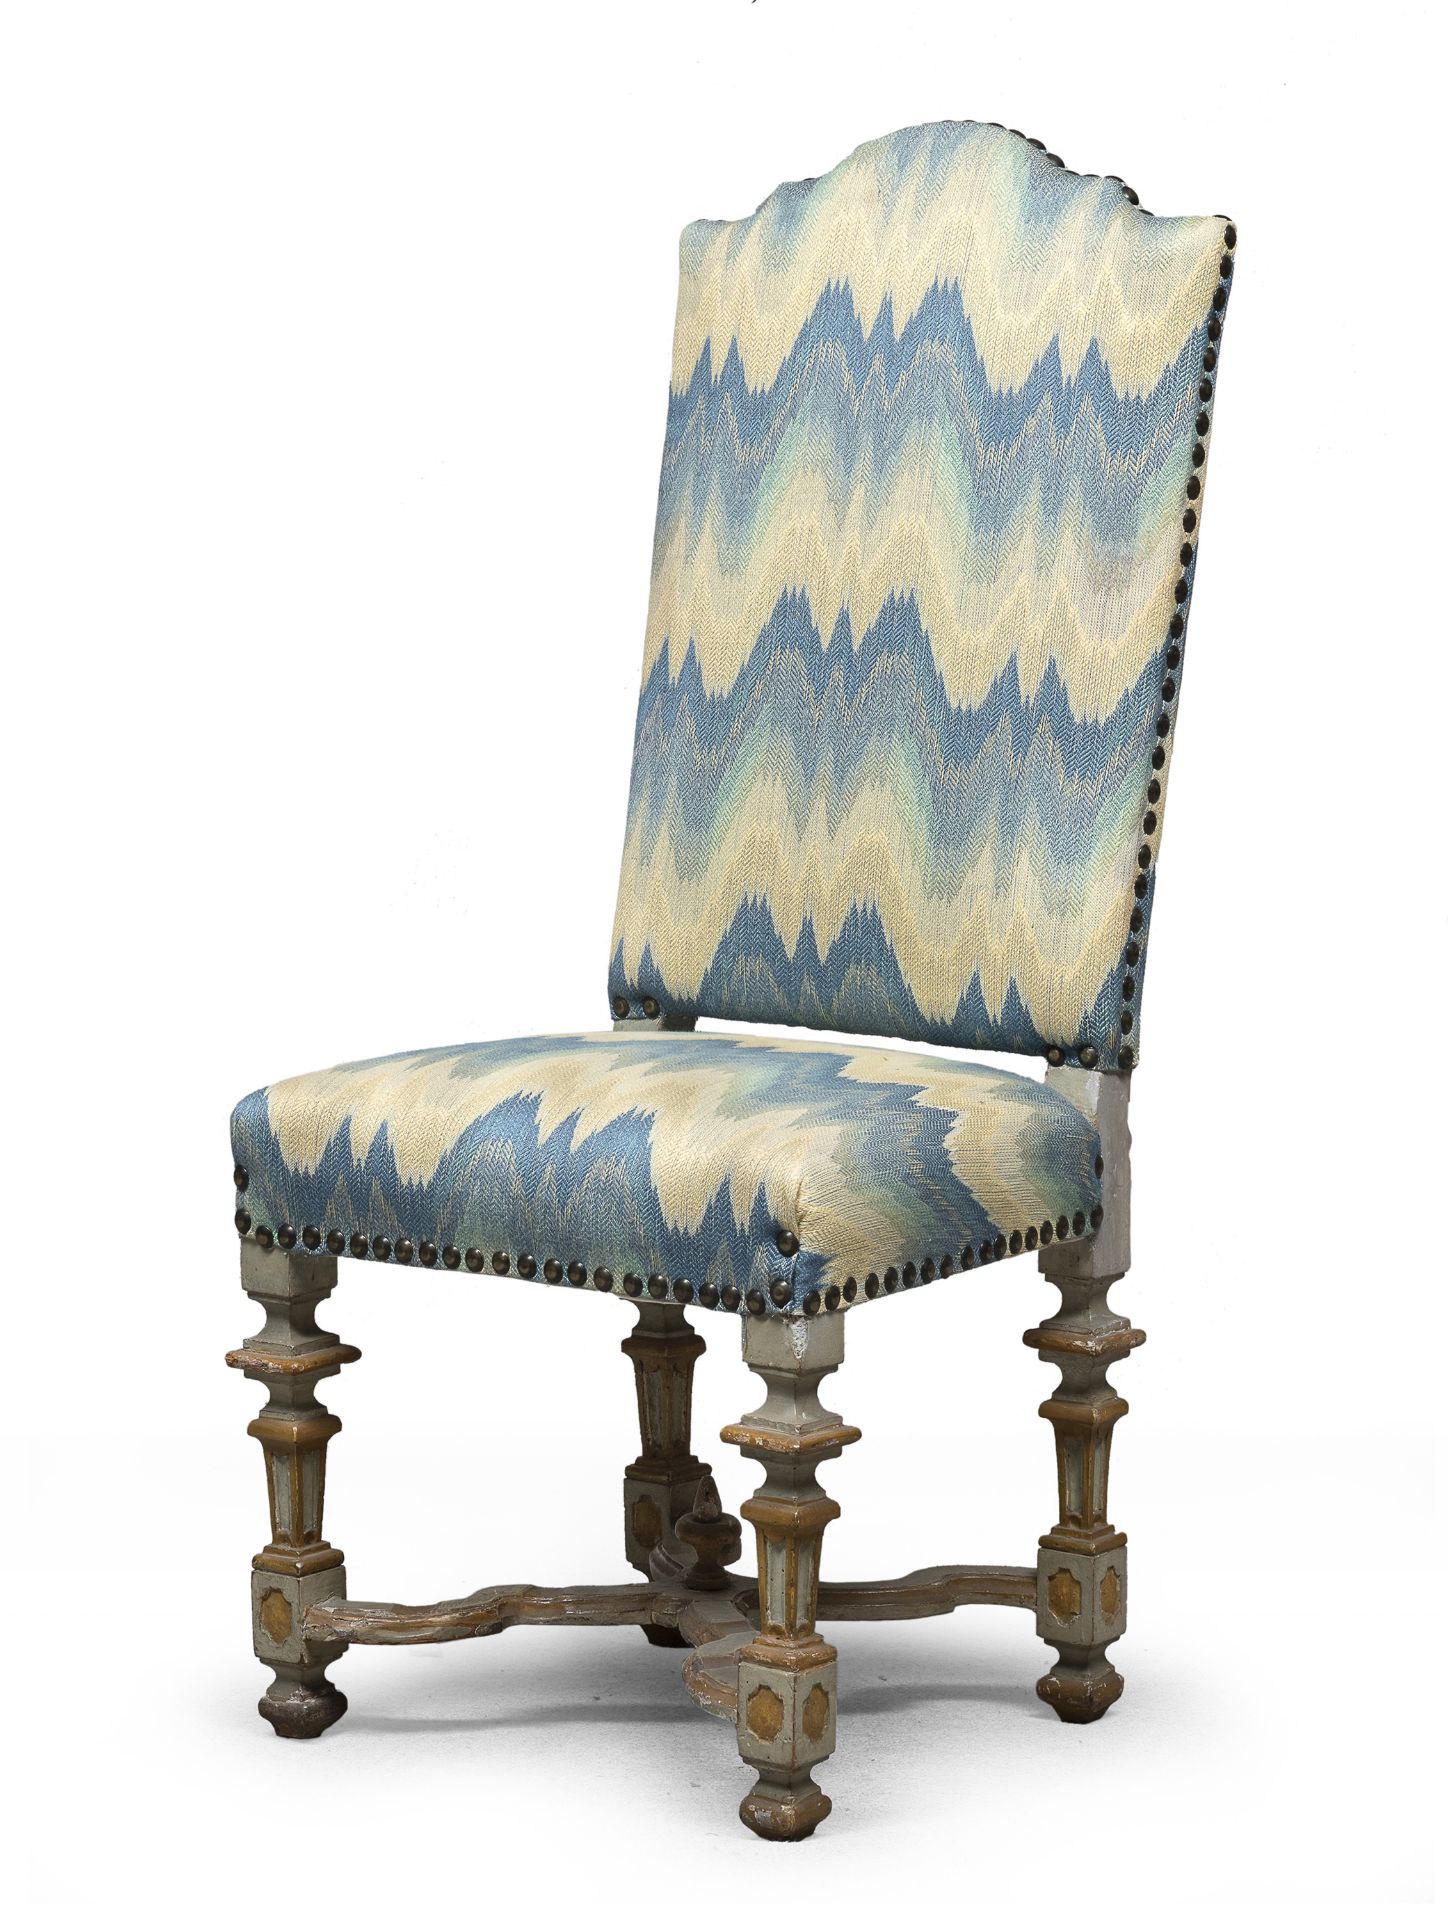 LACQUERED WOOD CHAIR 18TH CENTURY